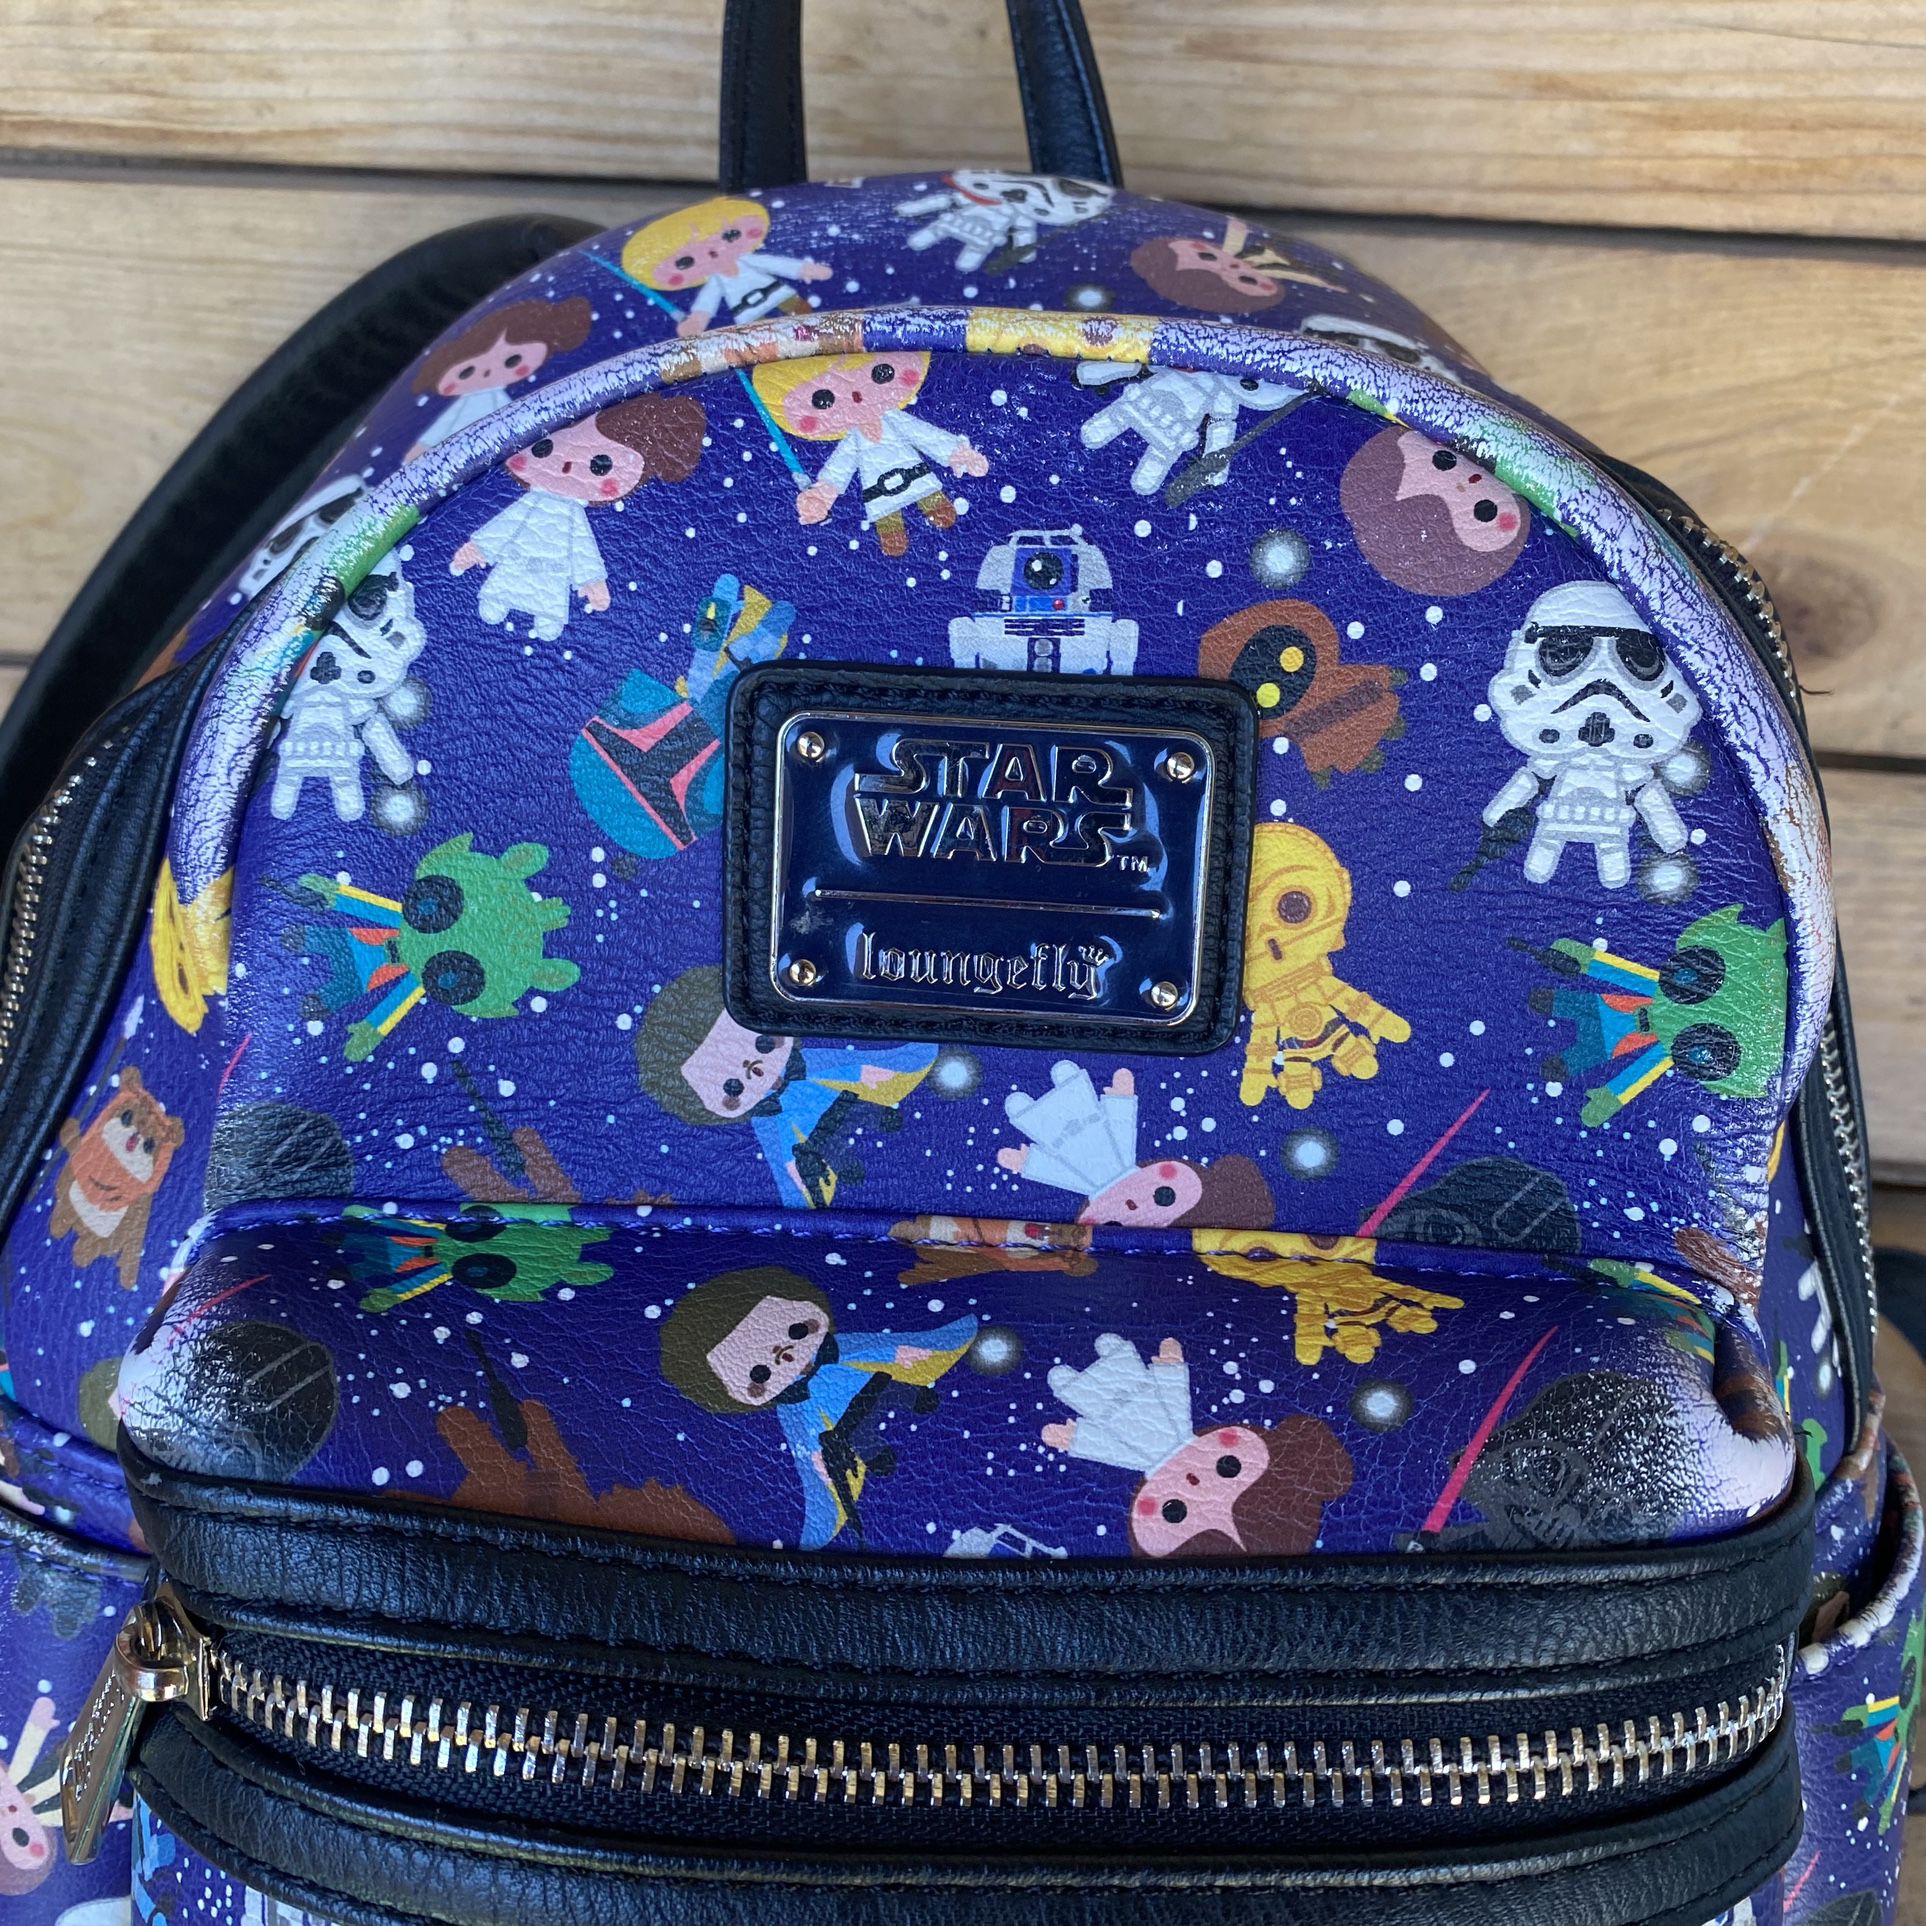 Pokémon Bulbasaur Loungefly Mini Backpack for Sale in Tustin, CA - OfferUp